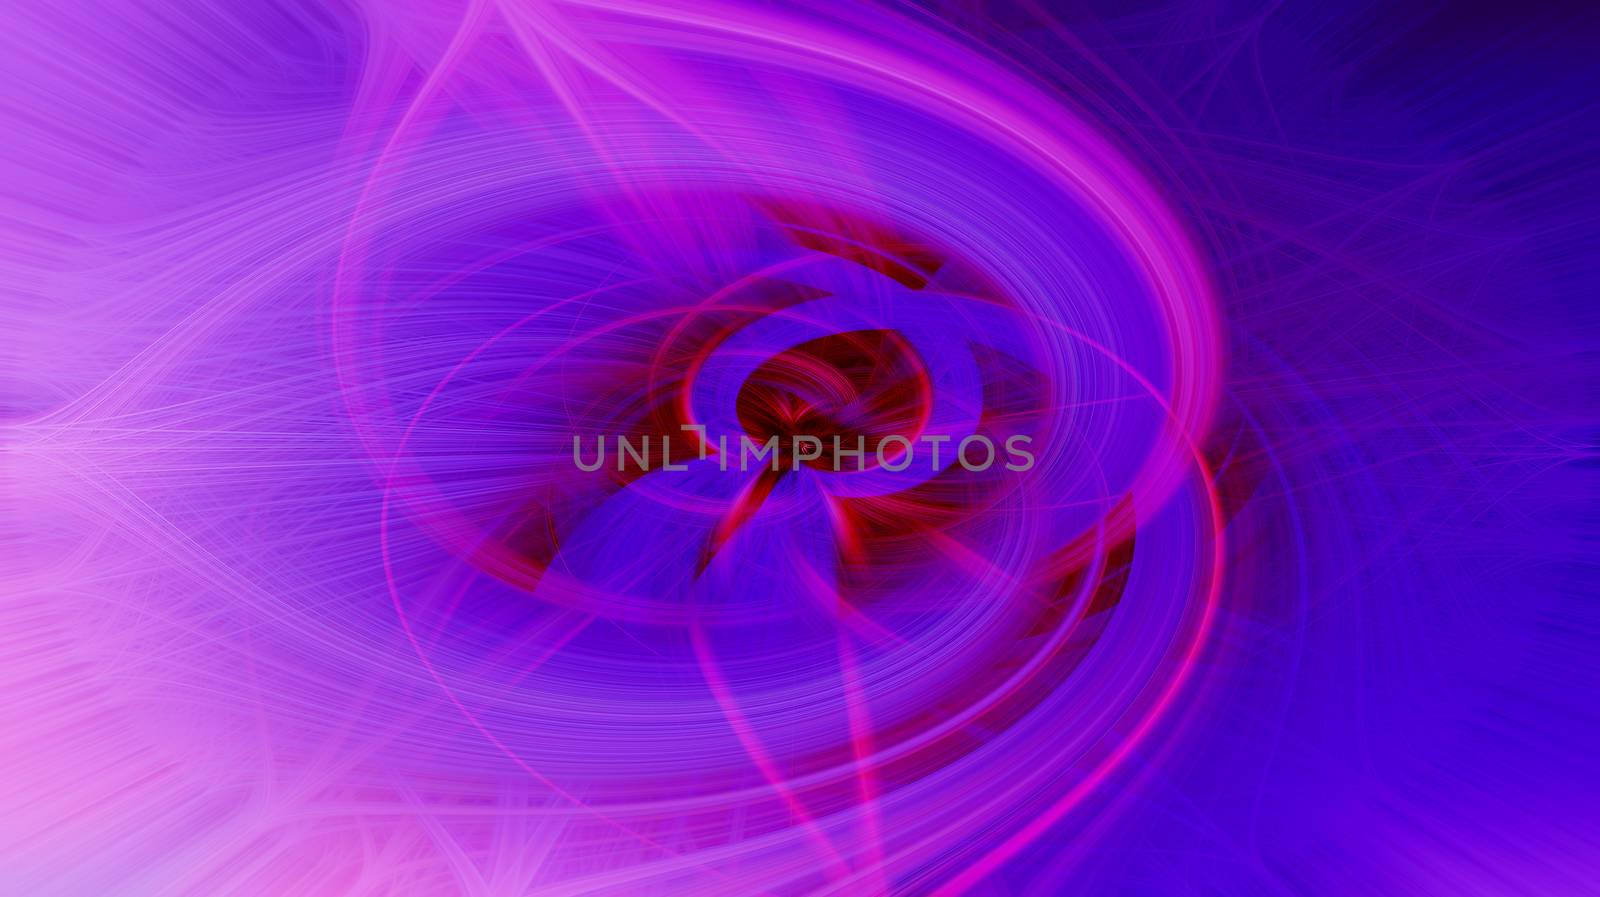 Beautiful abstract intertwined 3d fibers forming a shape of sparkle, flame, flower, interlinked hearts. Blue, maroon, pink, and purple colors. Illustration by DamantisZ